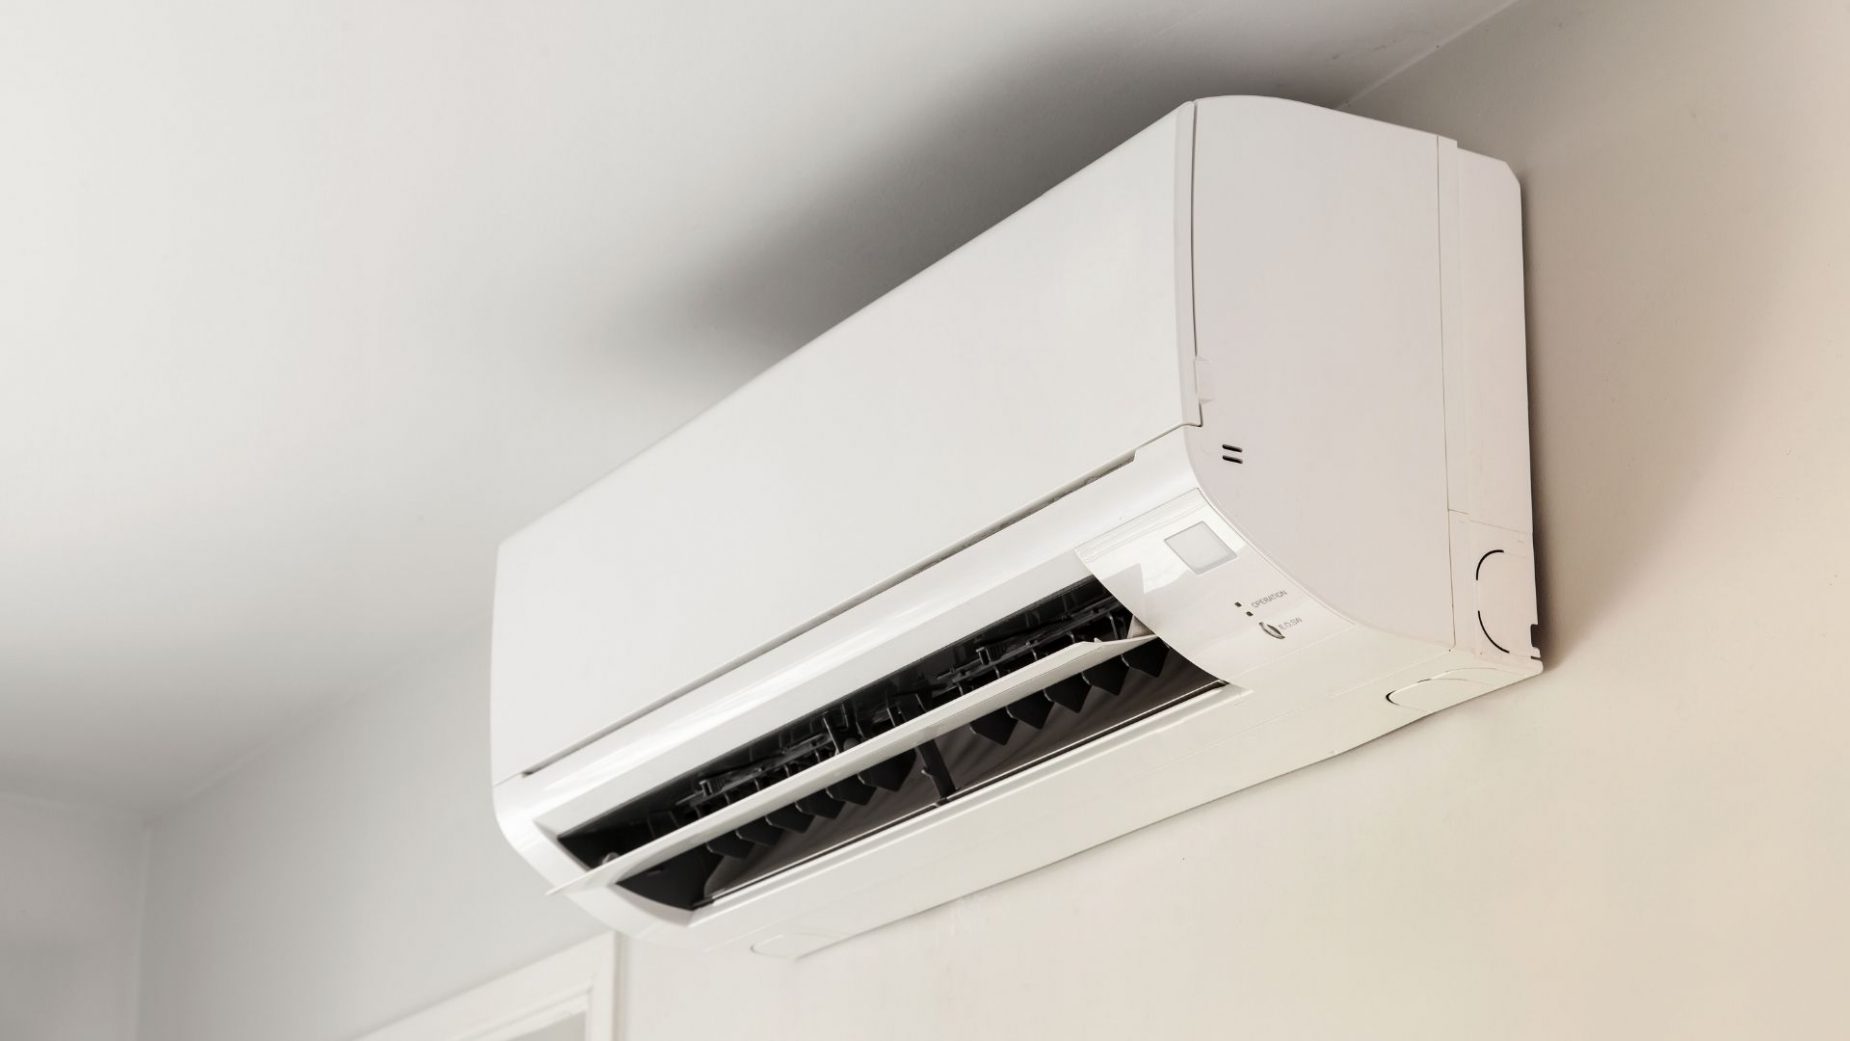 Global Air-Conditioning Equipment Market Outlook, Opportunities And Strategies